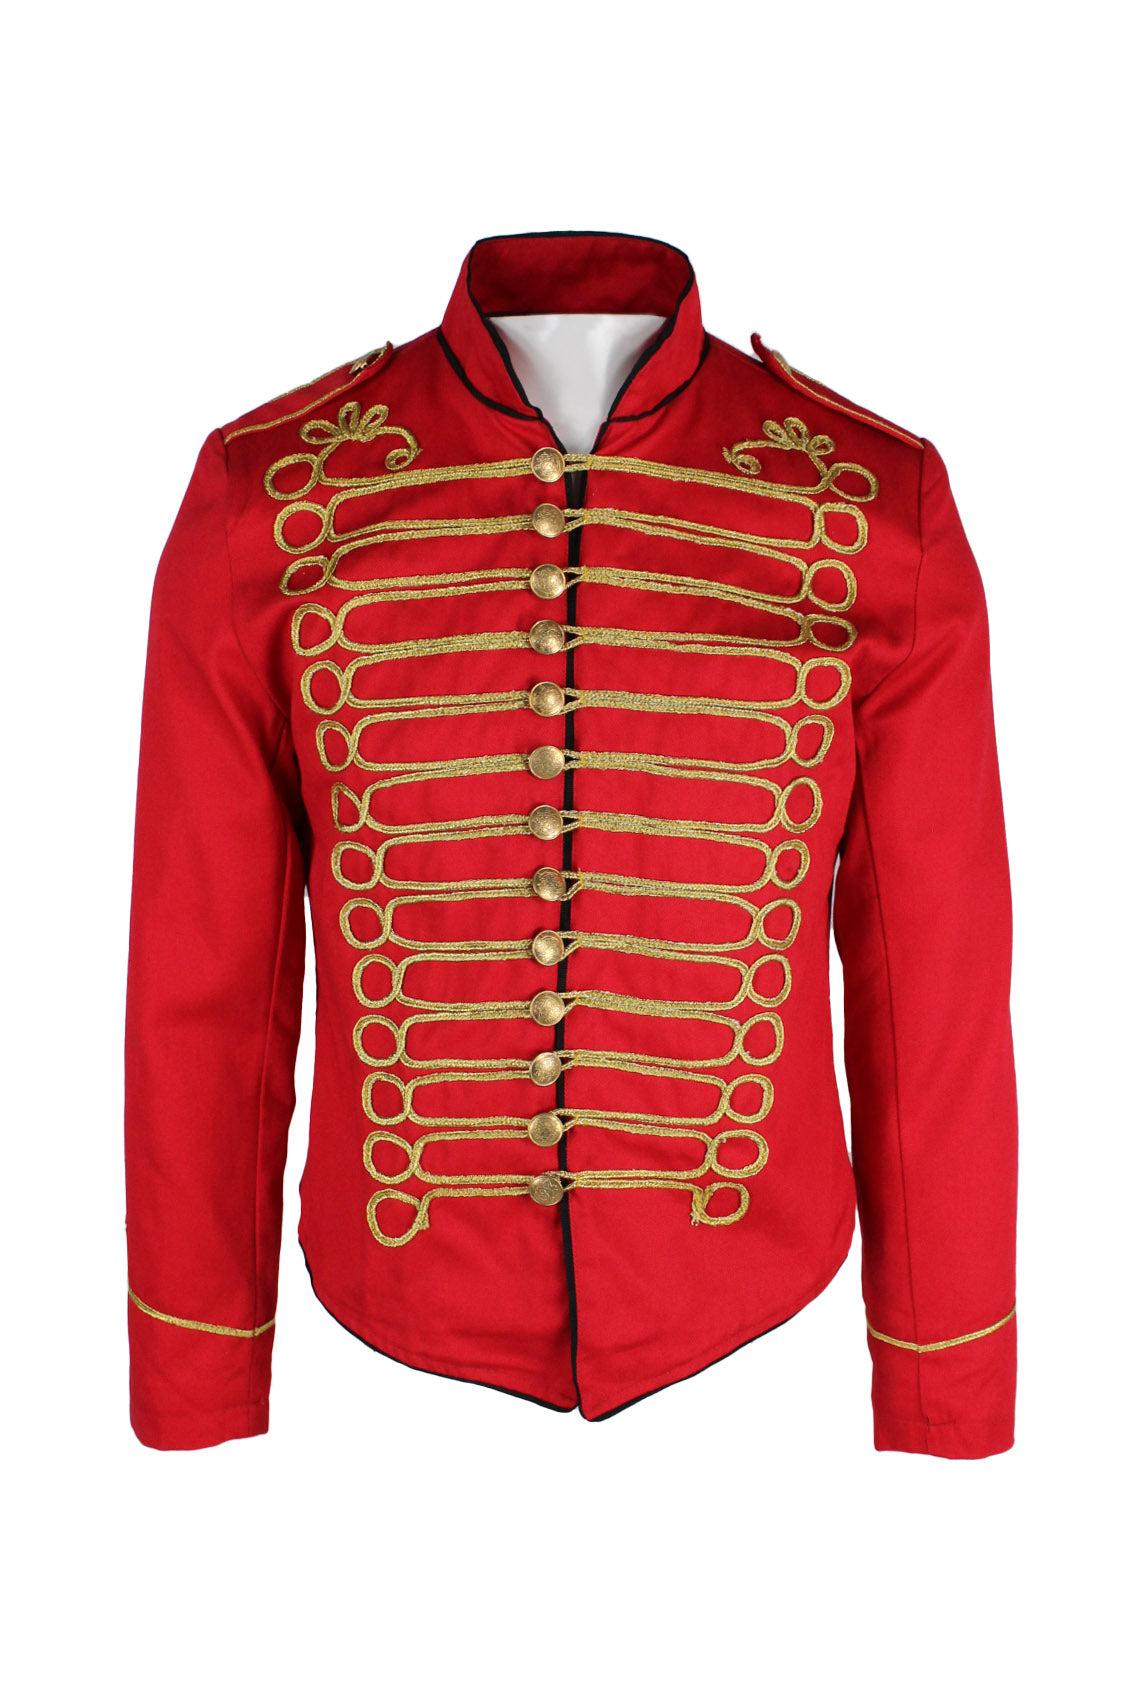 front angle ro rox red drummer parade jacket on masculine mannequin torso featuring gold toned metallic trim, stand-up collar, shoulder epaulettes, and stamped gold toned front button closure.